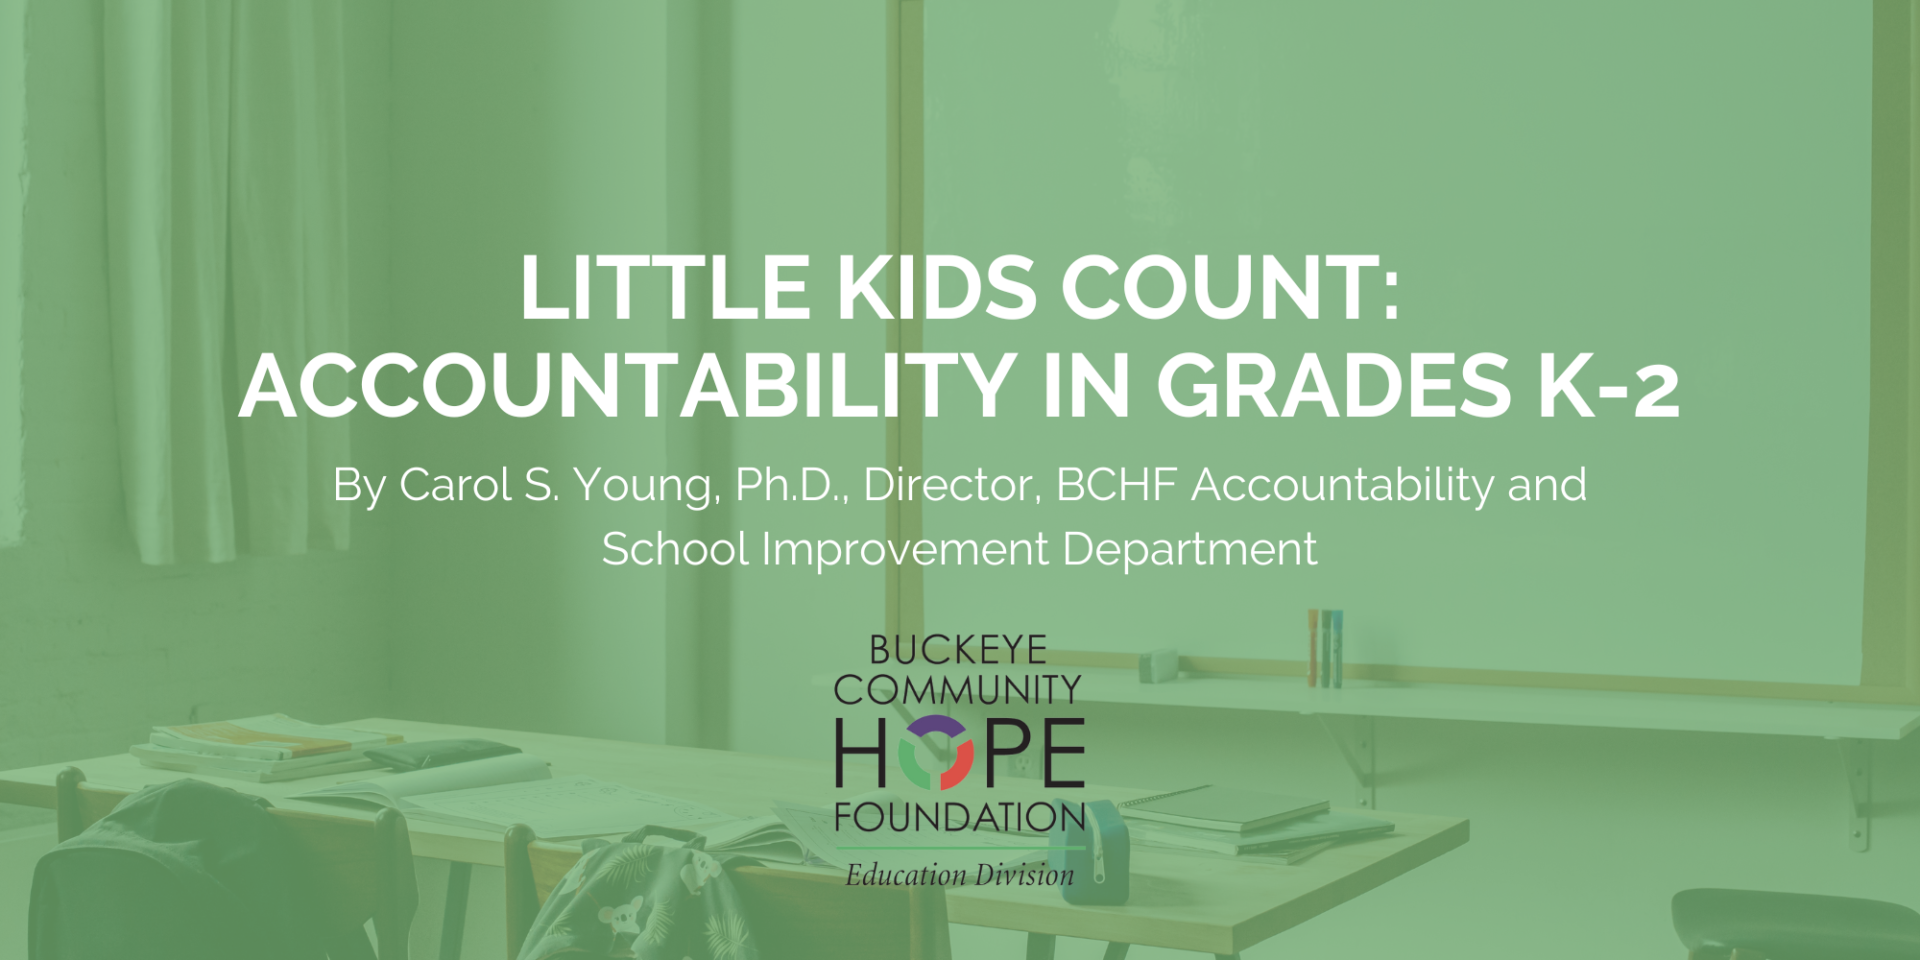 Little Kids Count: Accountability in Grades K-2